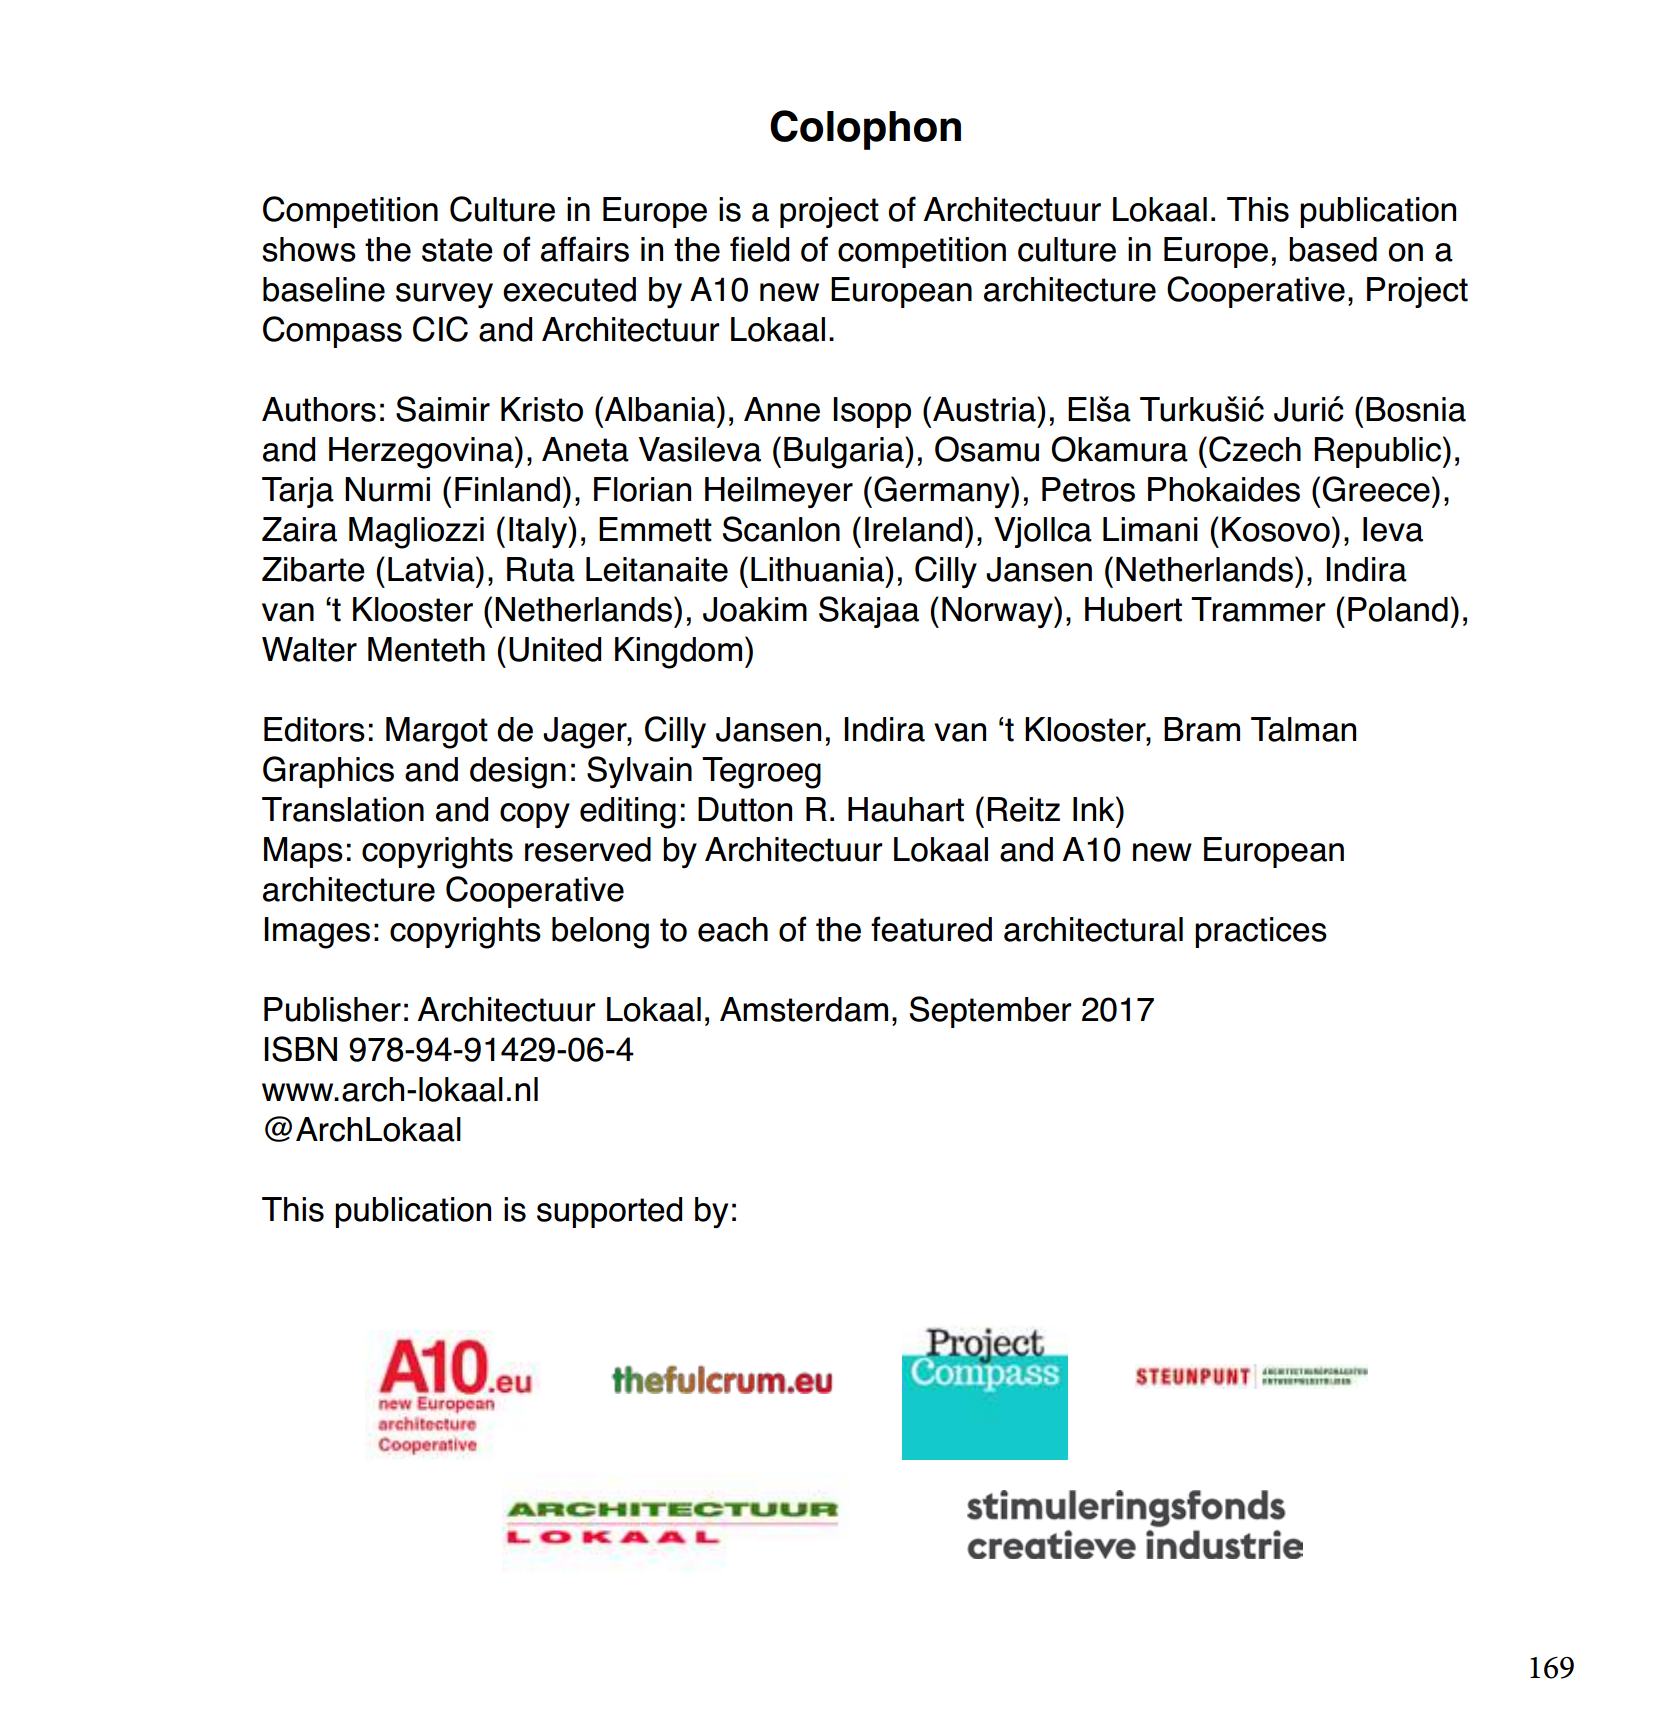 Competition Culture in Europe 2013–2016 : Results of a pan-European survey executed by Architectuur Lokaal, A10 new European architecture Cooperative and Project Compass CIC to be presented and discussed at the Conference on Competition Culture in Europe 28 and 29 september 2017, Amsterdam / Editors: Margot de Jager, Cilly Jansen, Indira van ‘t Klooster, Bram Talman. — Amsterdam : Architectuur Lokaal, 2017